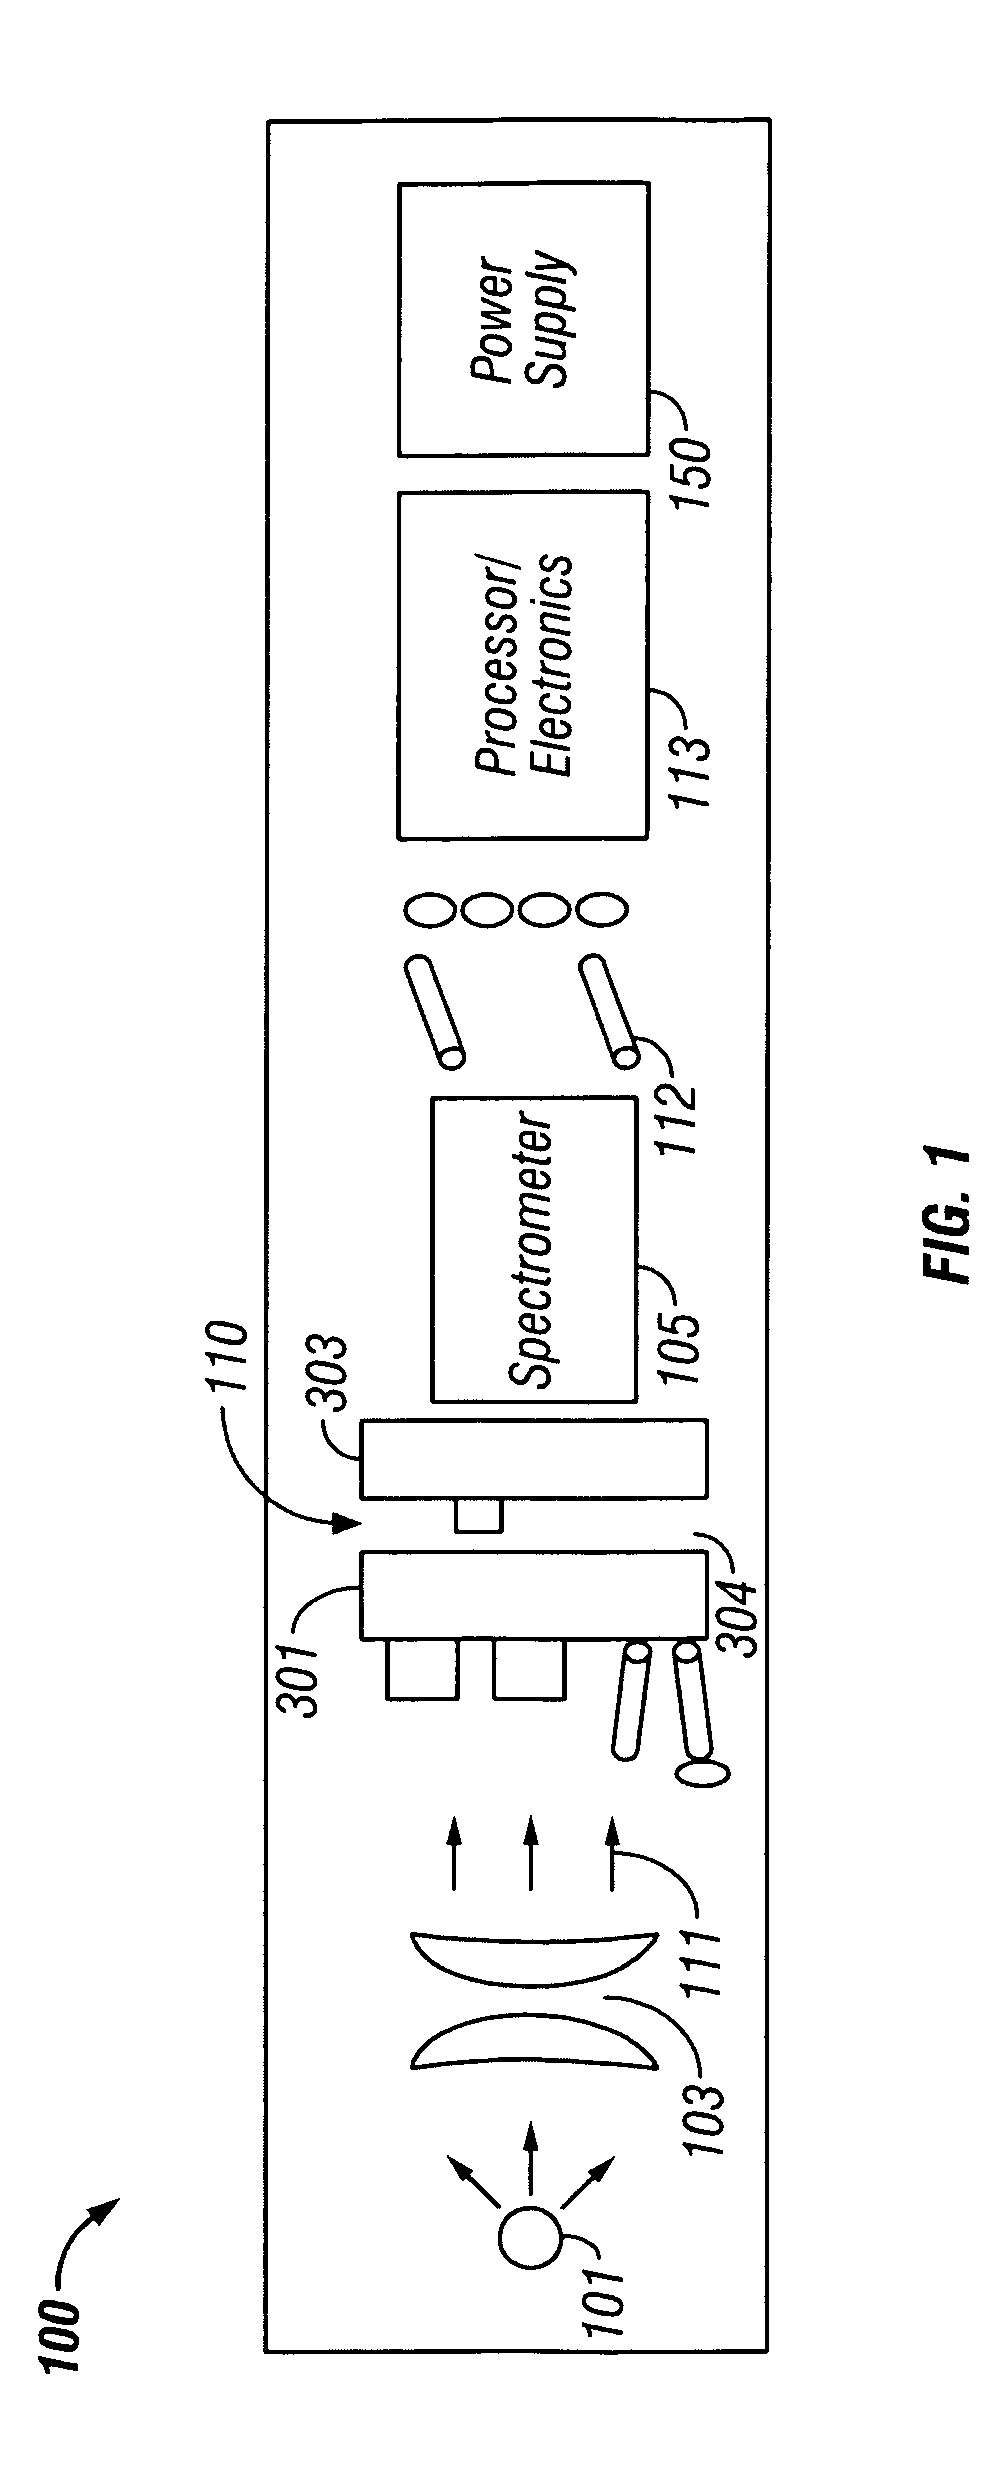 Method and apparatus for estimating of fluid contamination downhole